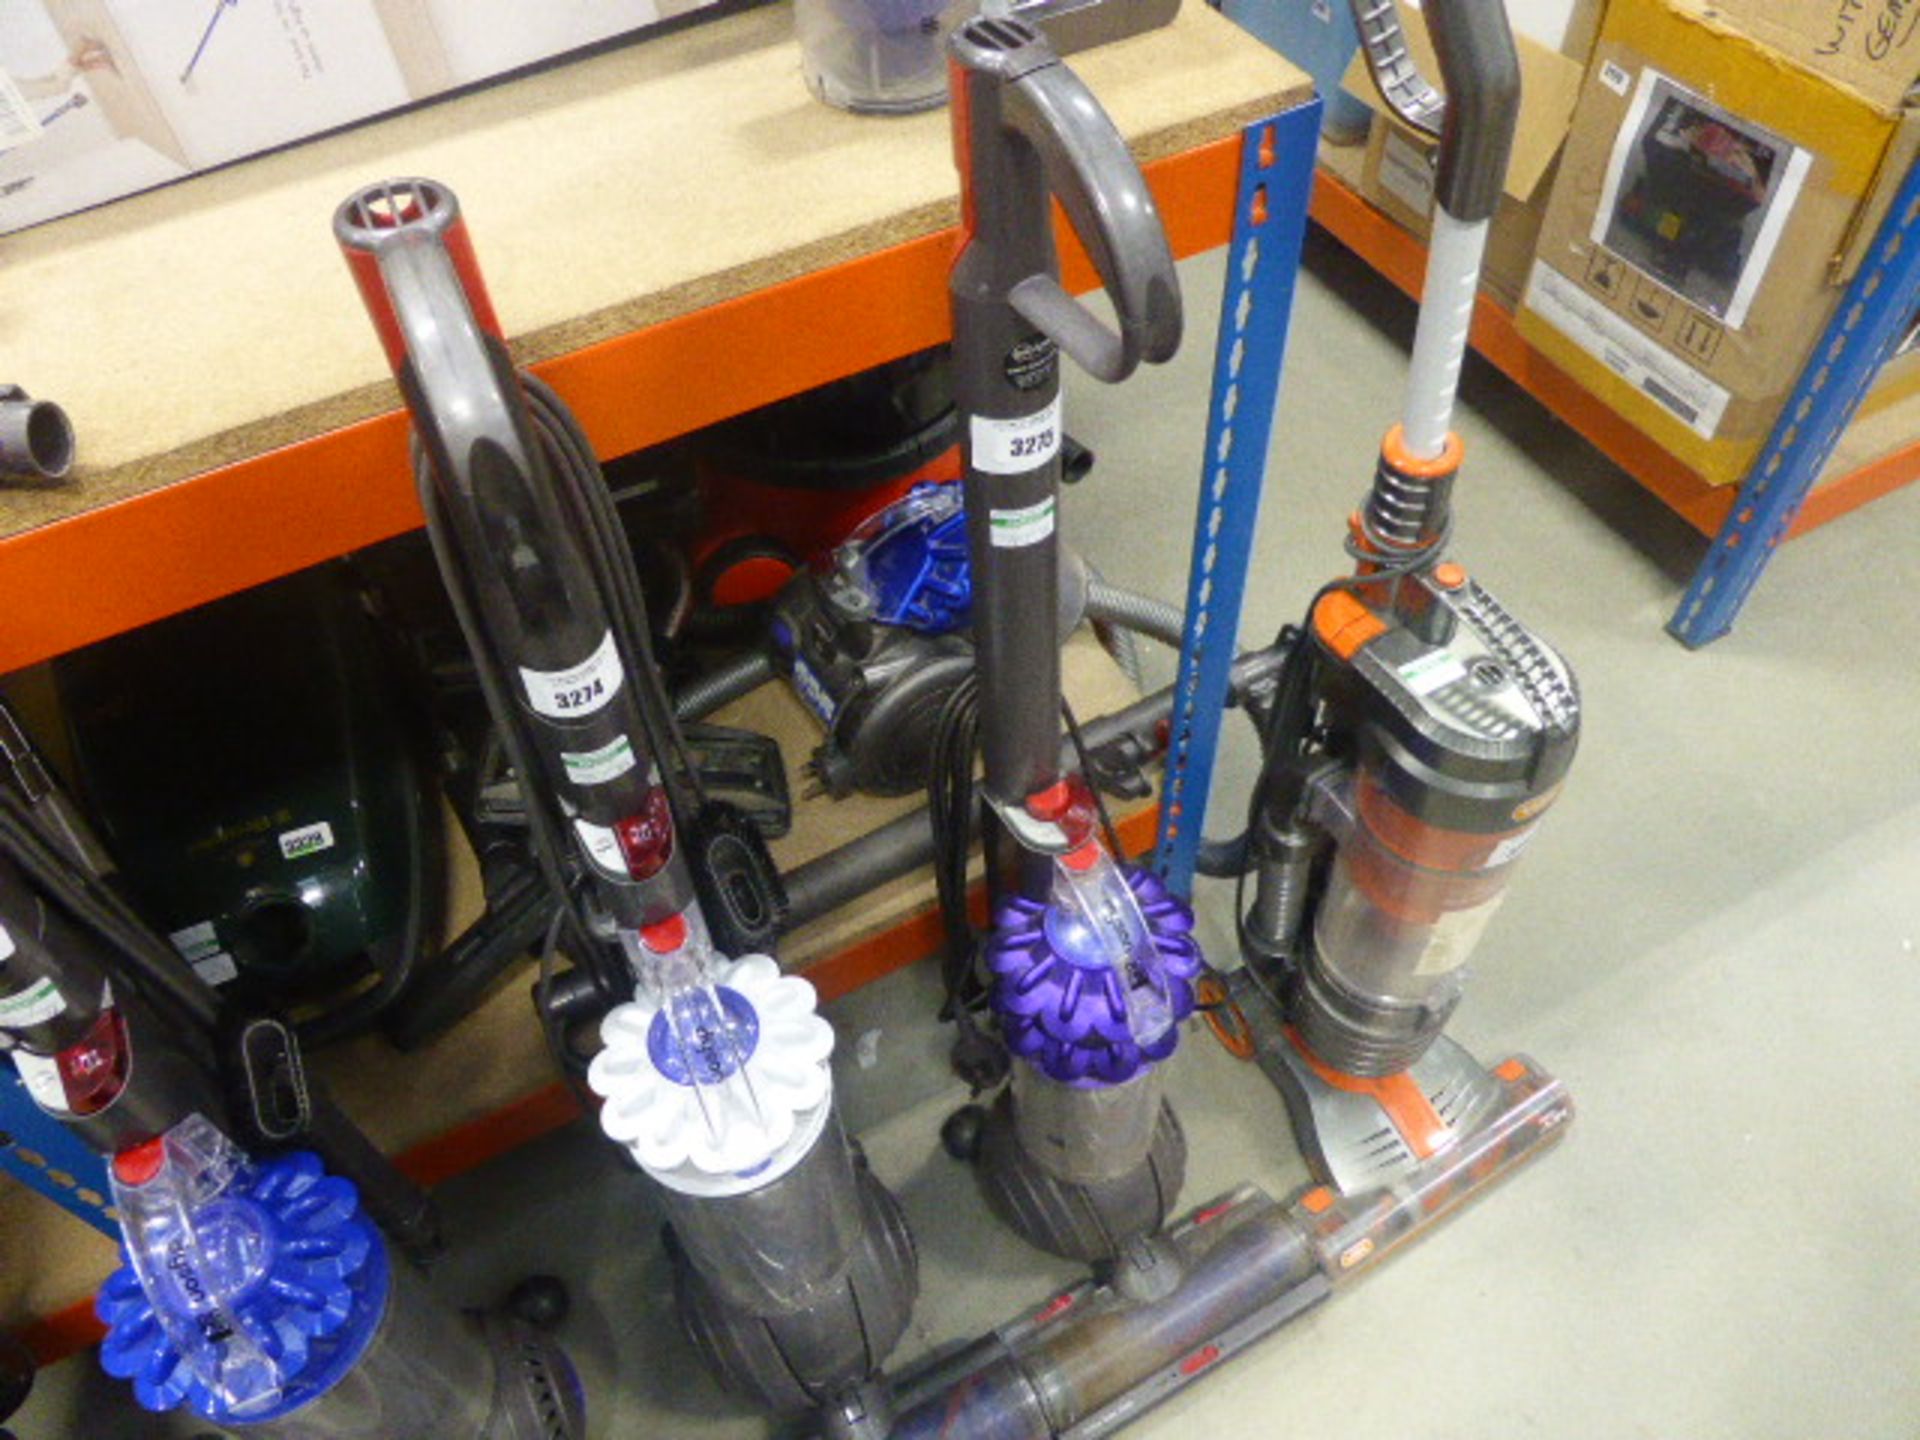 Upright Dyson DC50 vacuum cleaner